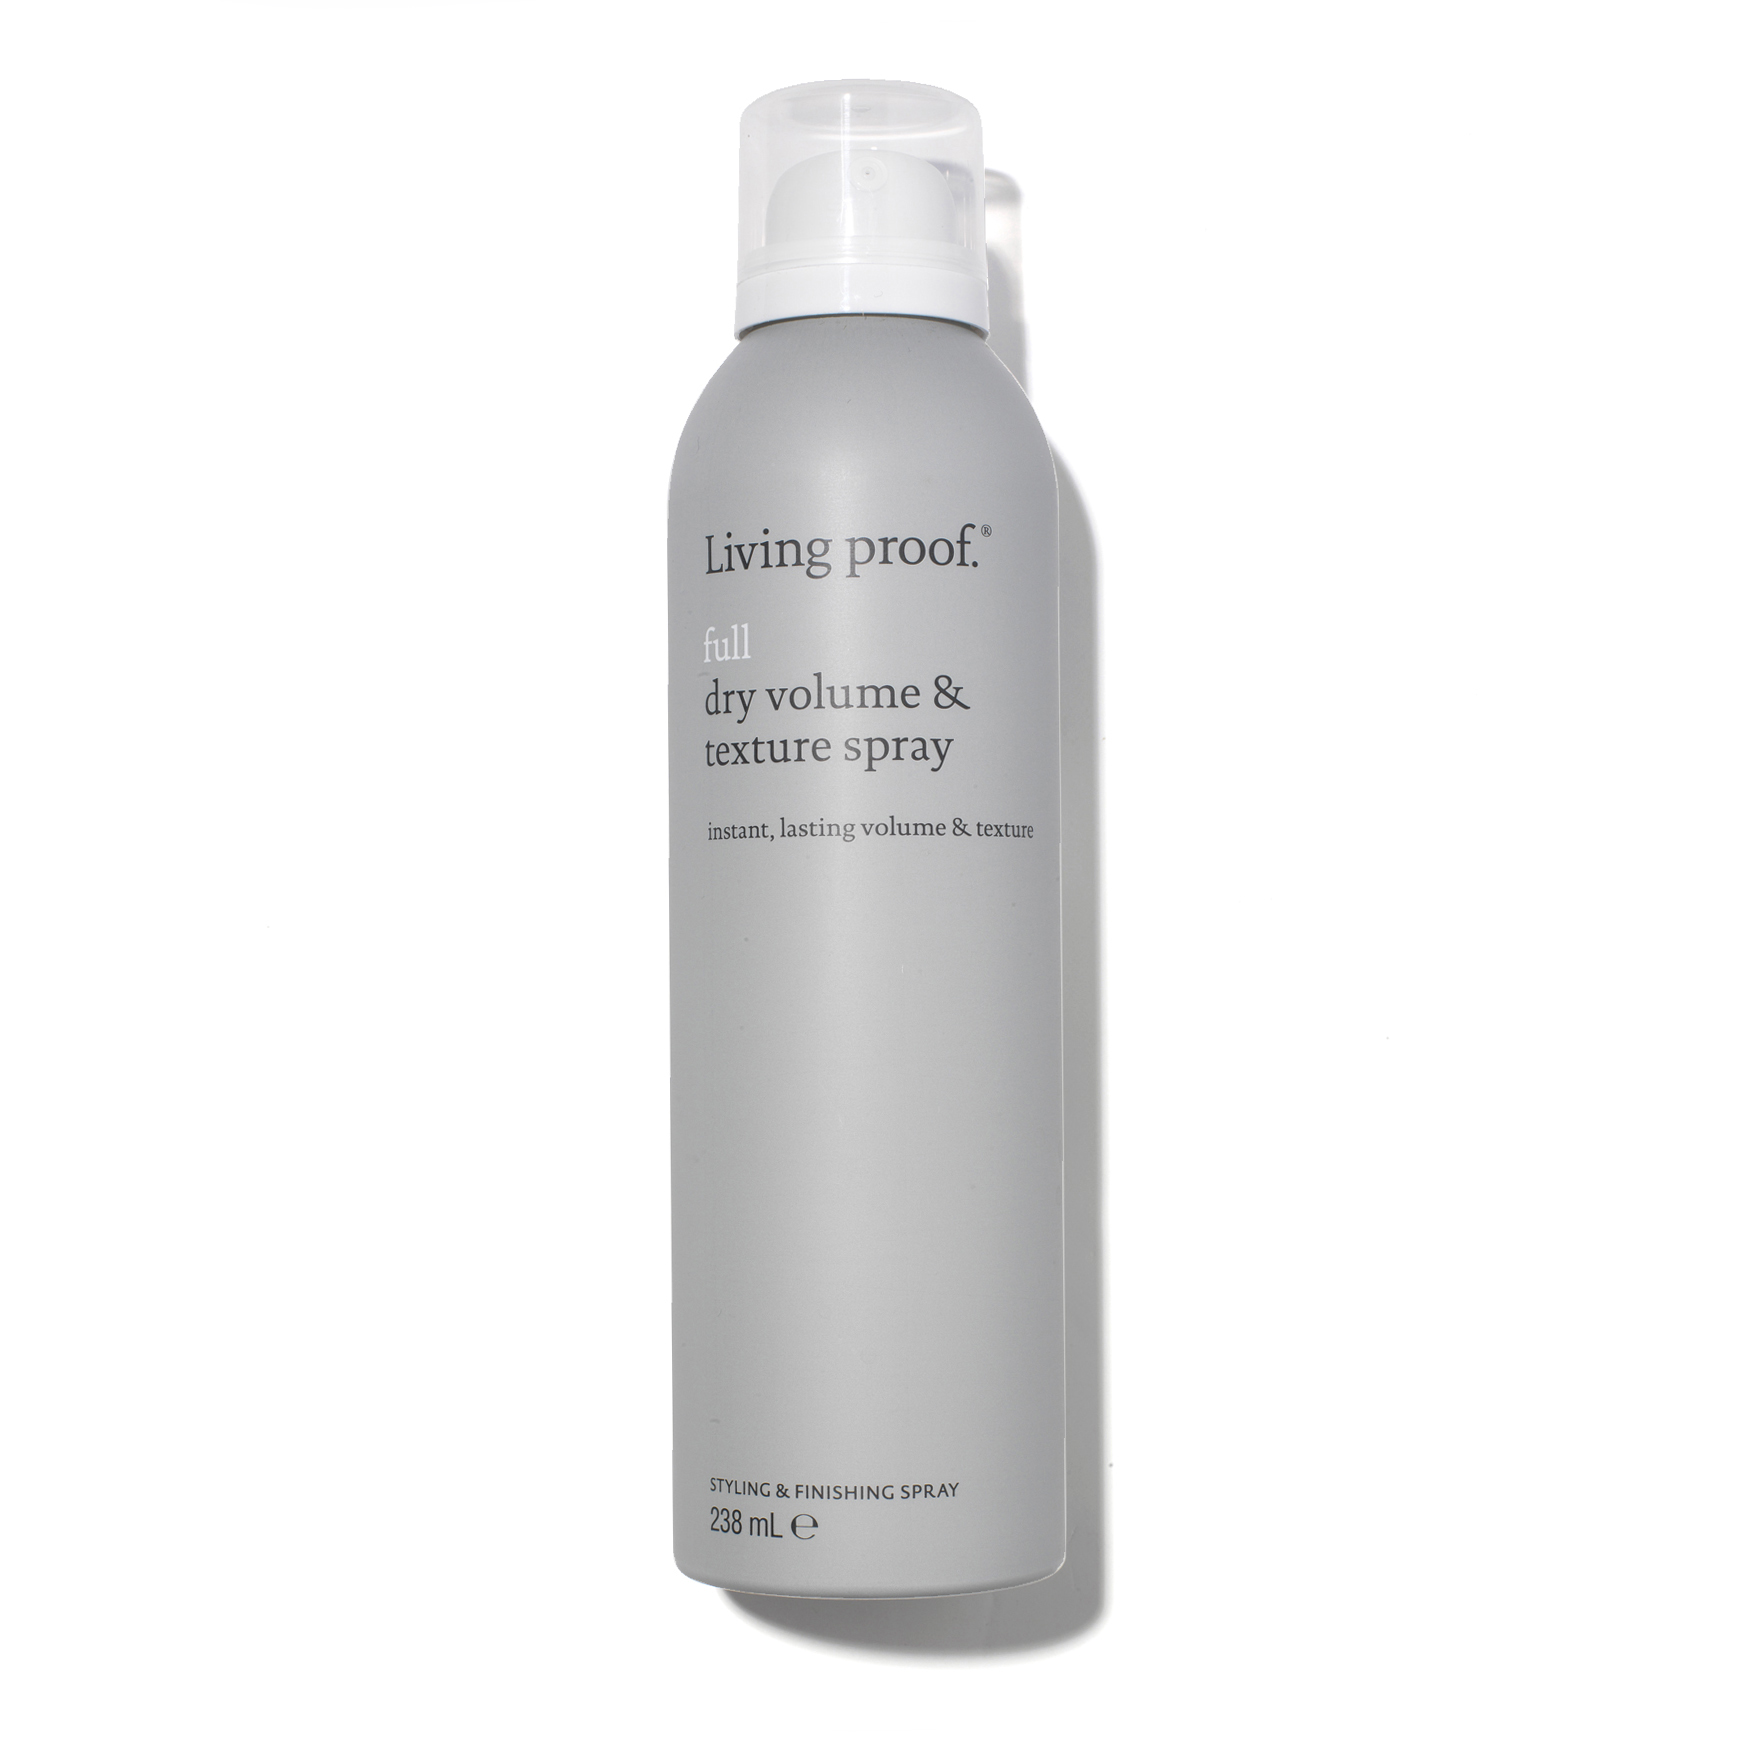 Living Proof Full Dry Volume & Texture Spray | Space NK